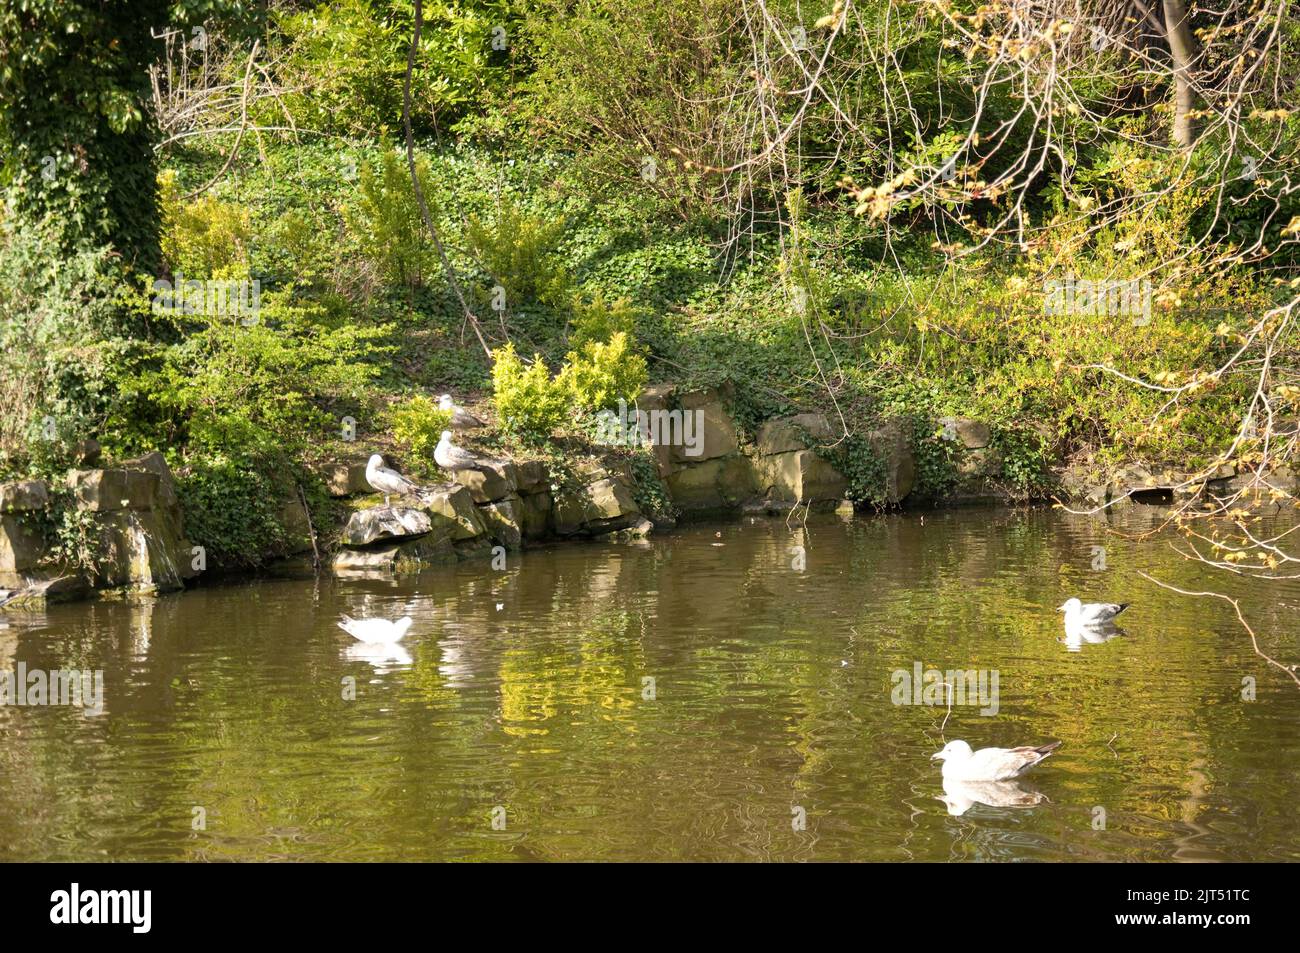 Birds on Lake, St Stephen's Green, Dublin, Eire.  St Stephen's Green is a public park in Central Dublin, with large areas for walking and enjoying the Stock Photo